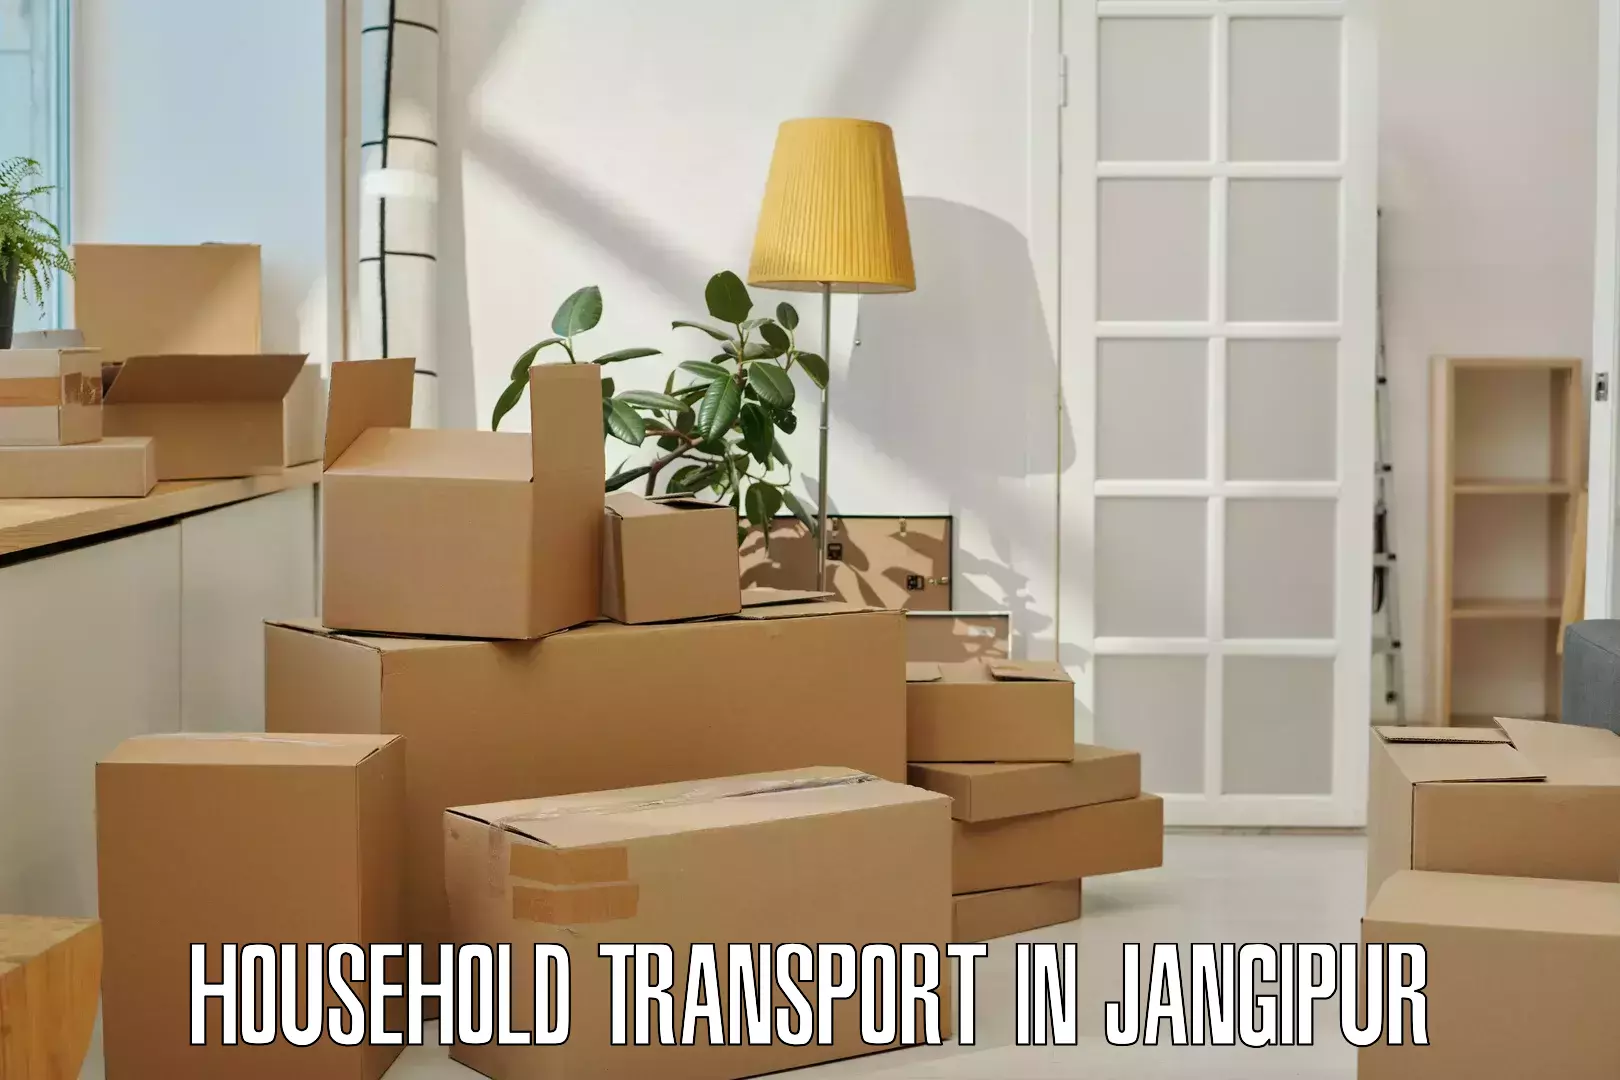 Furniture moving specialists in Jangipur